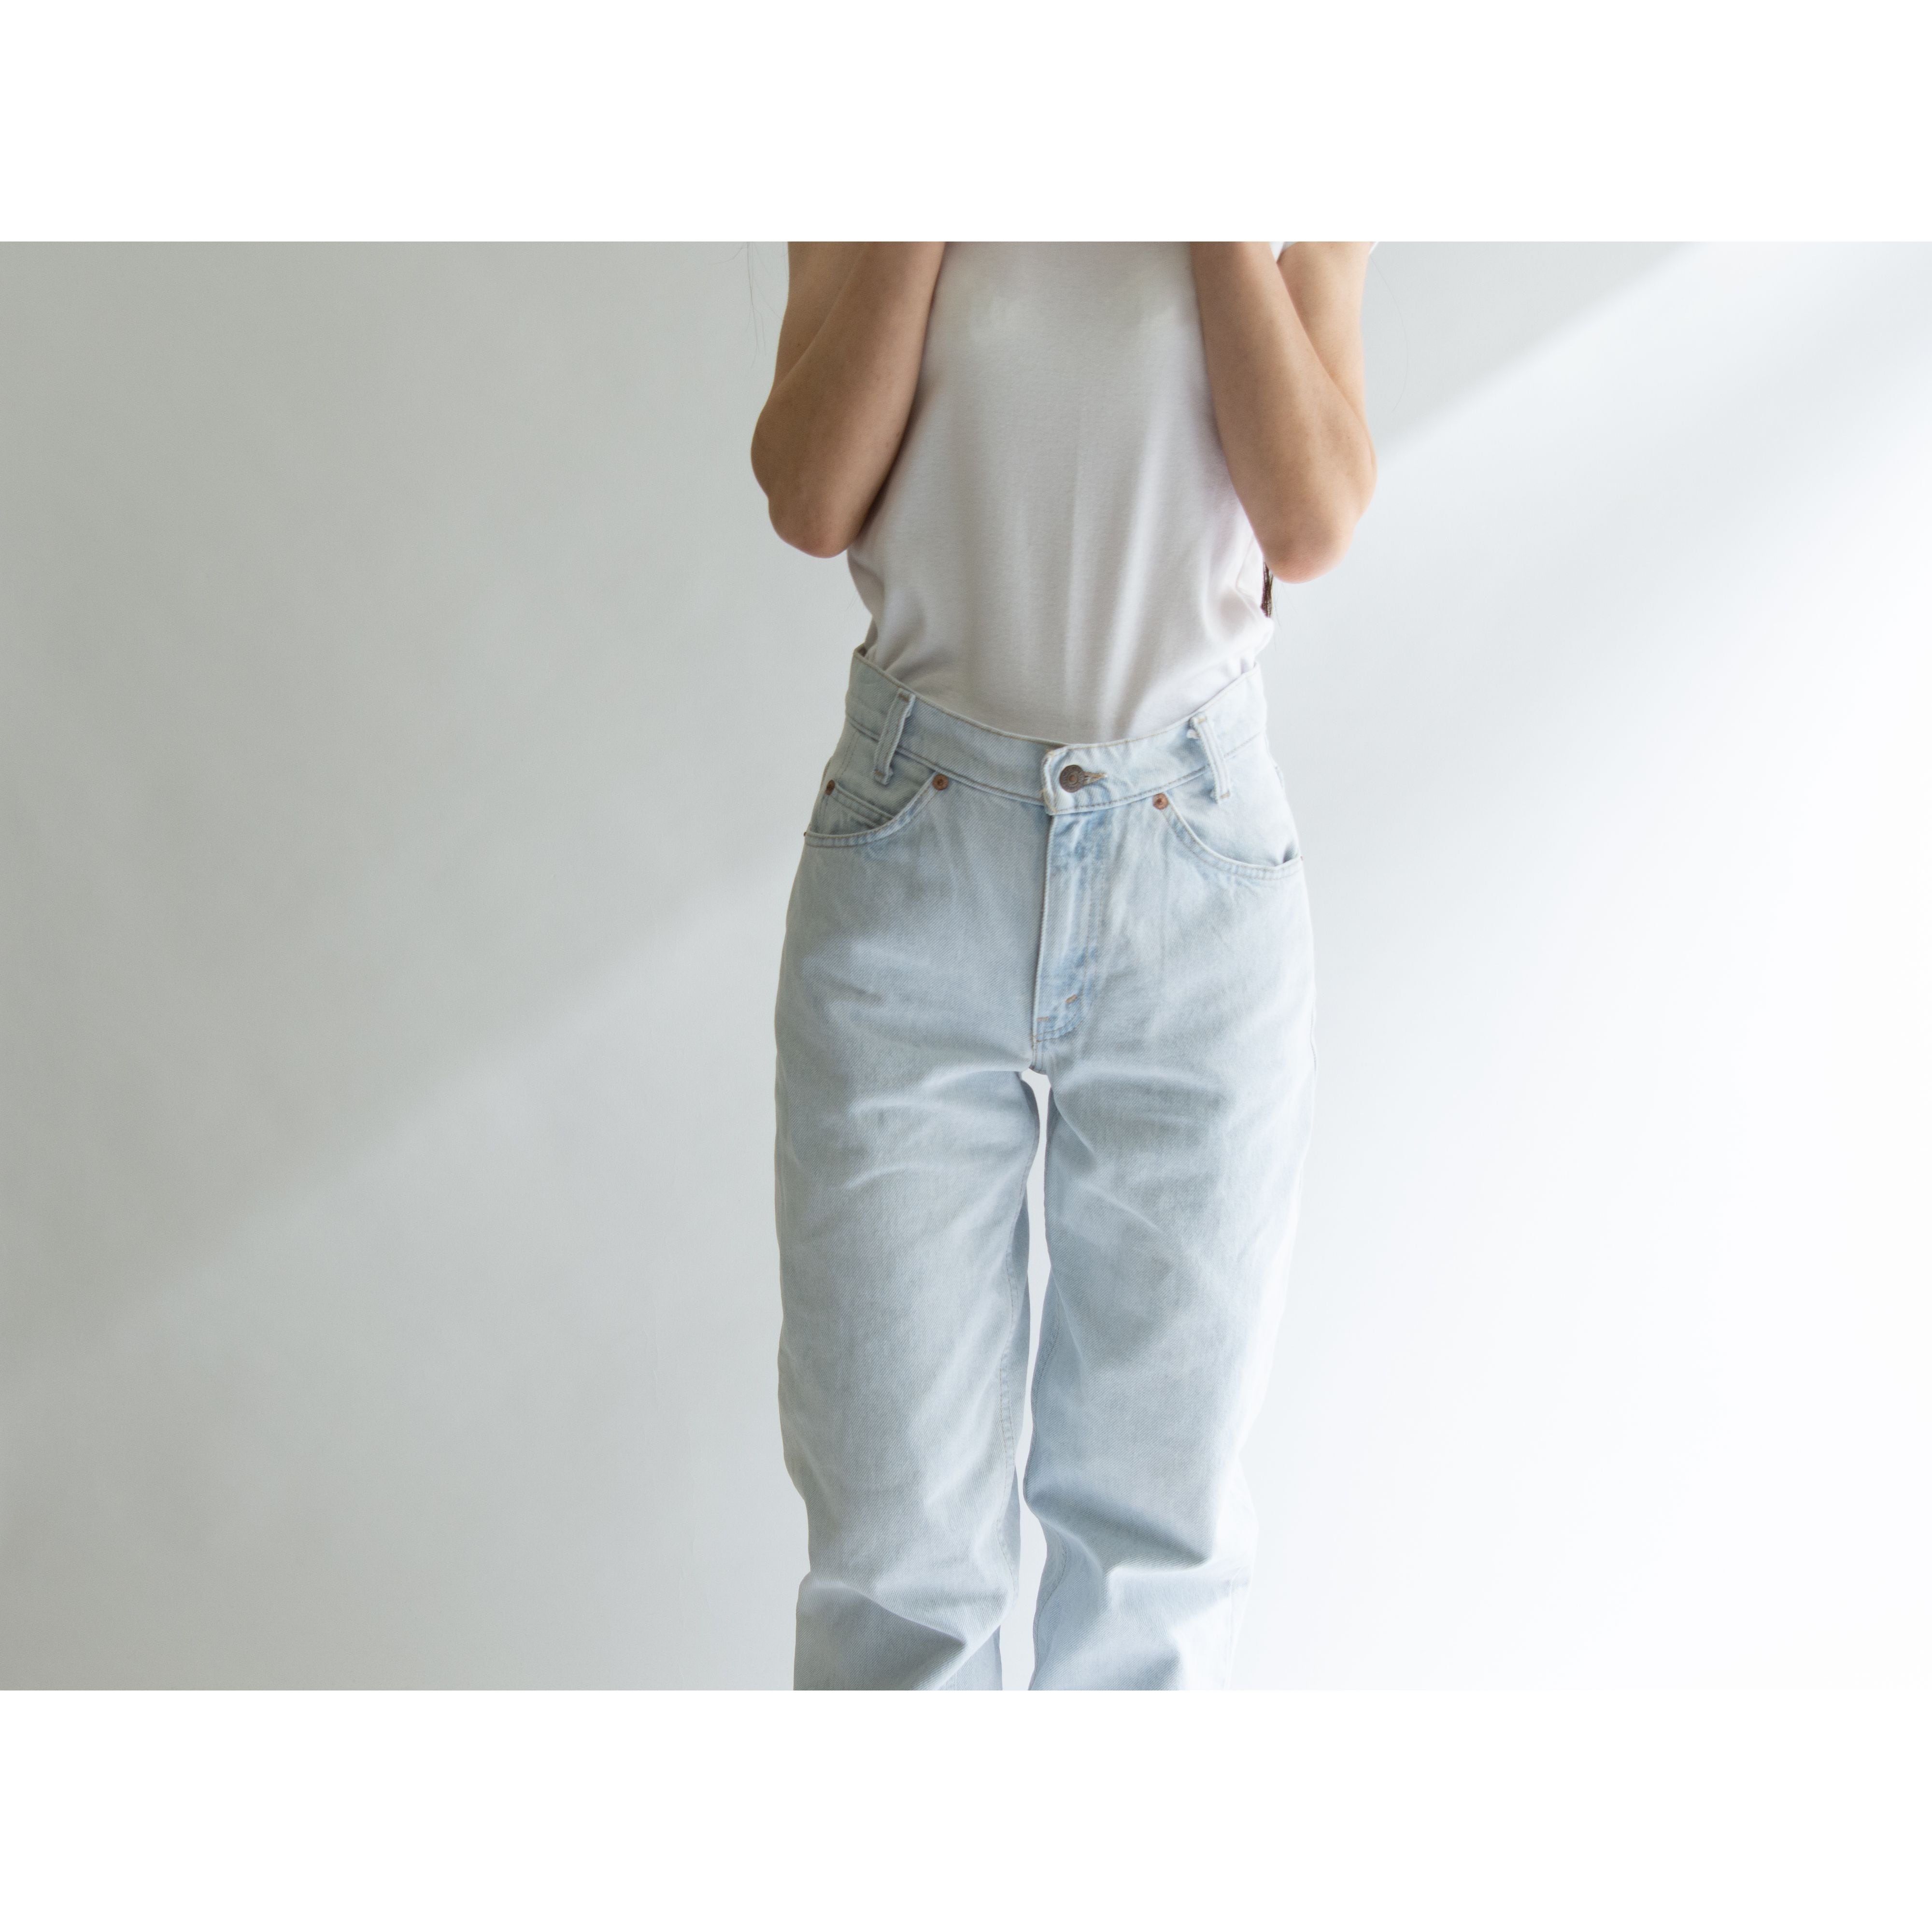 【LEVI'S 550 "STUDENT"】Made in U.S.A. 90's Tapered Jeans W27 L32（リーバイス アメリカ製 テーパード デニムパンツ ジーンズ）